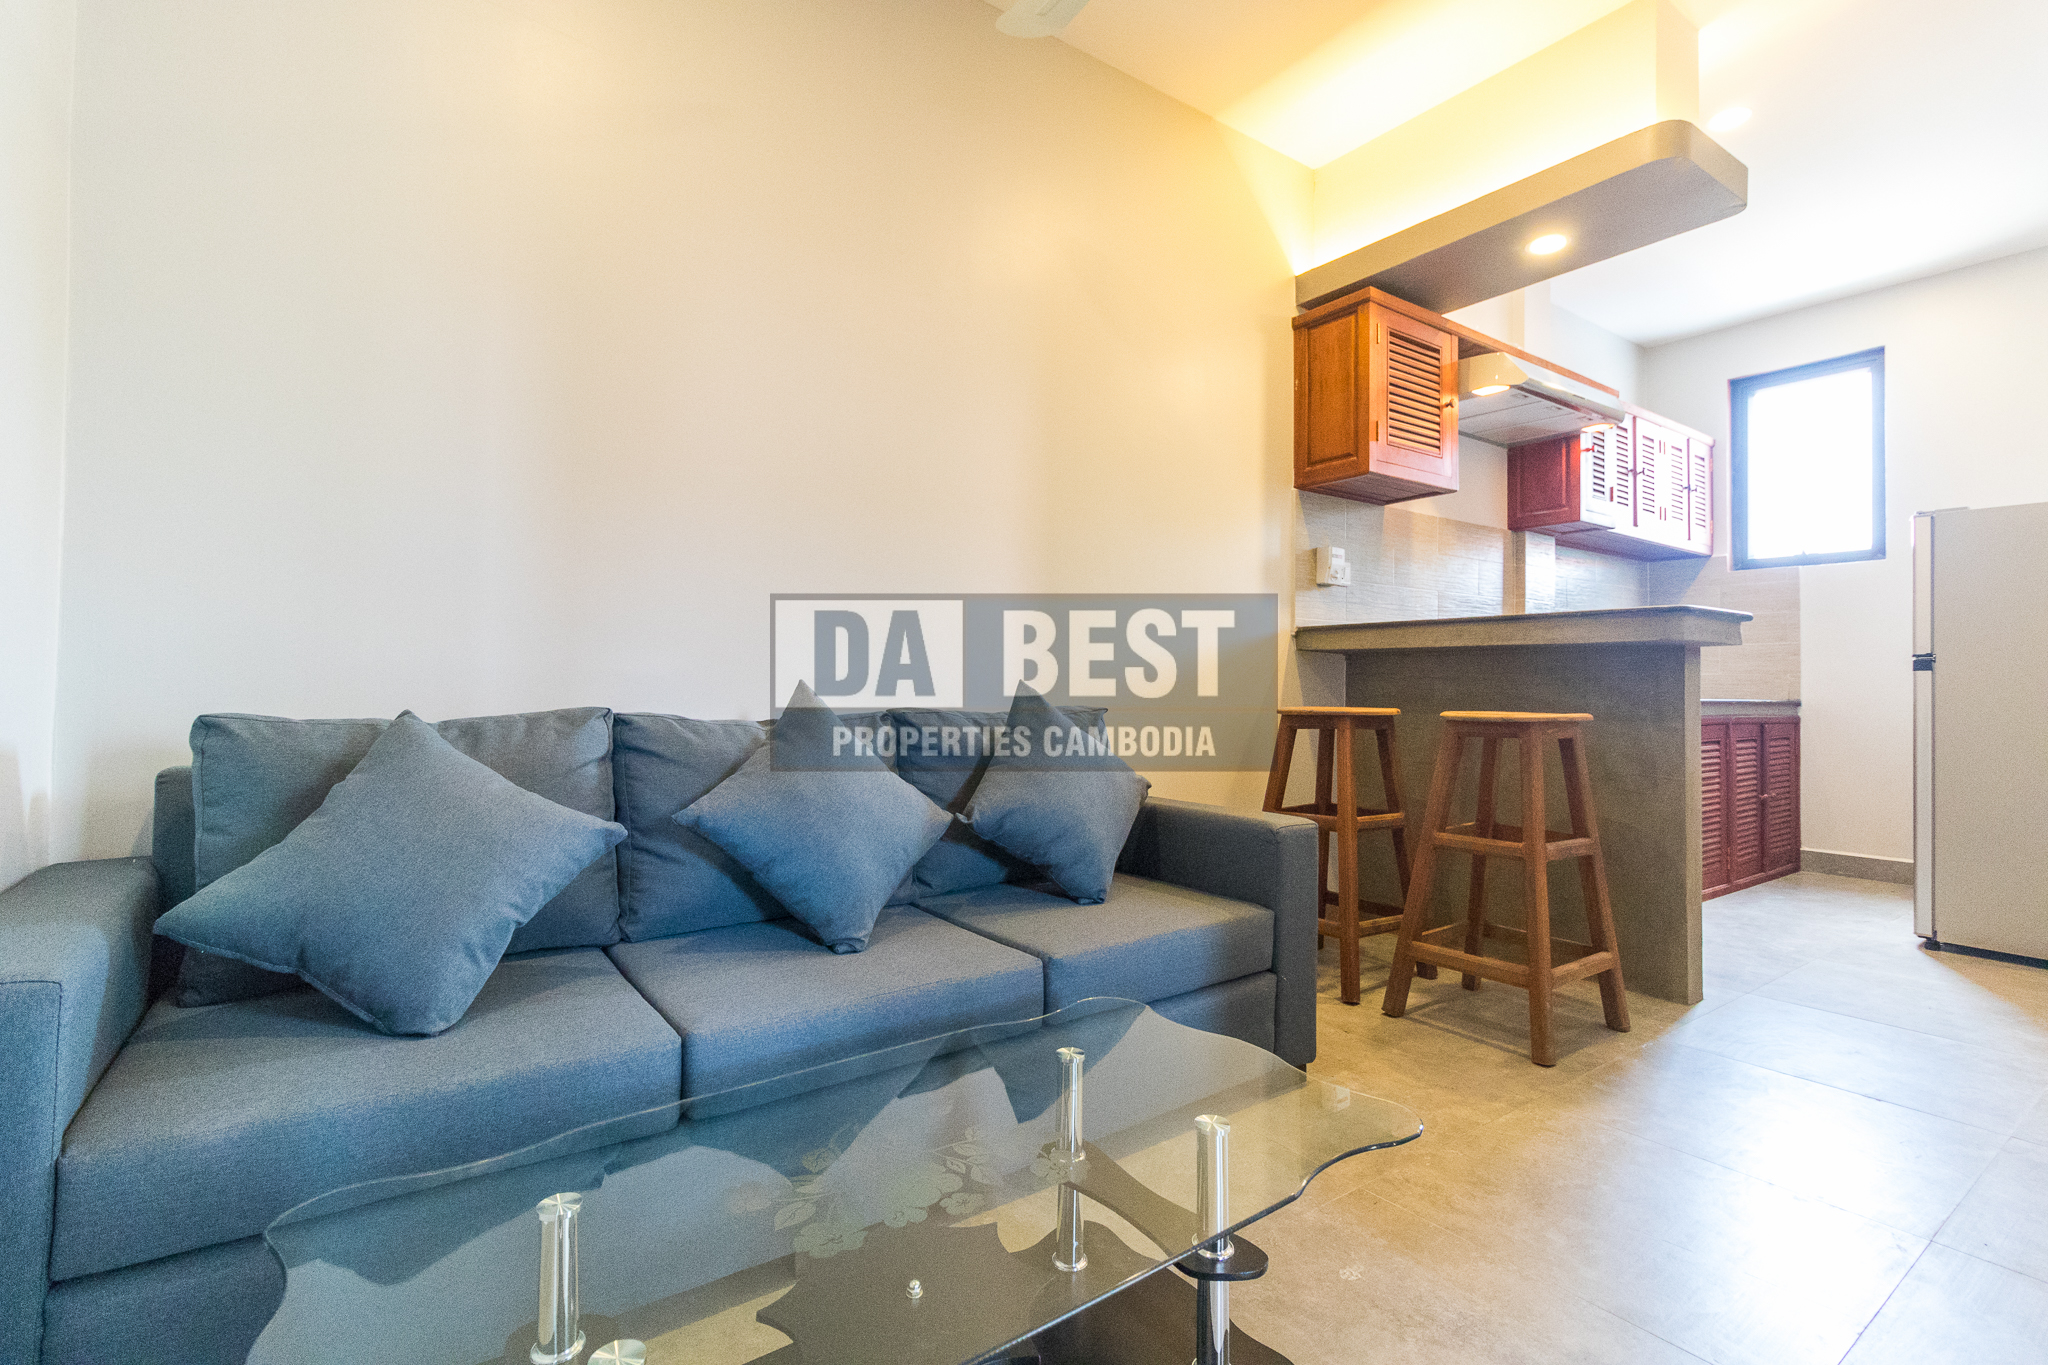 1 Bedroom Apartment For Rent In Siem Reap – Night Market